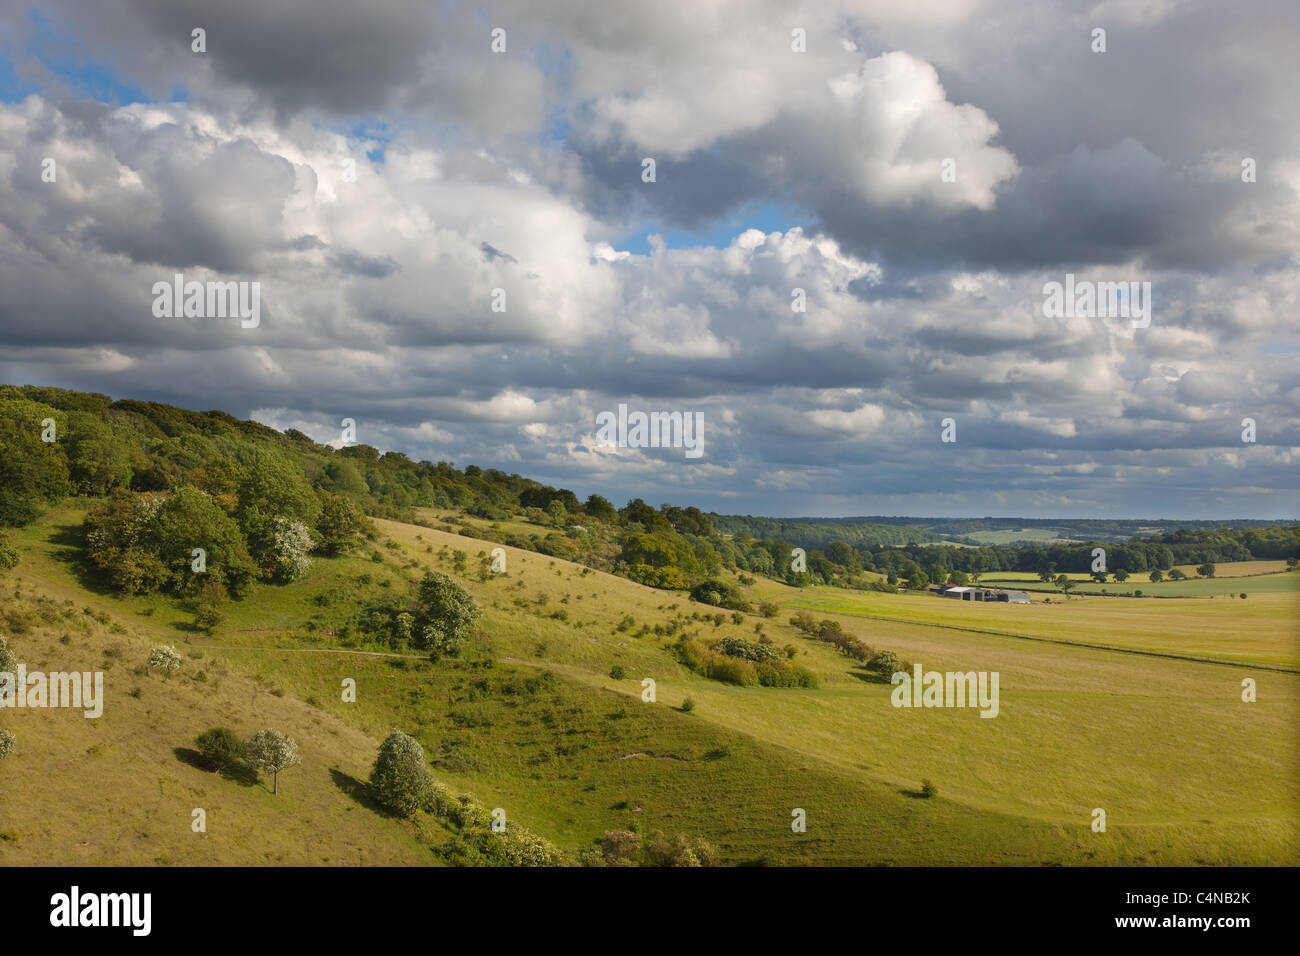 Down Farm Aldbury from Ivinghoe hills Chilterns Buckinghamshire Stock Photo